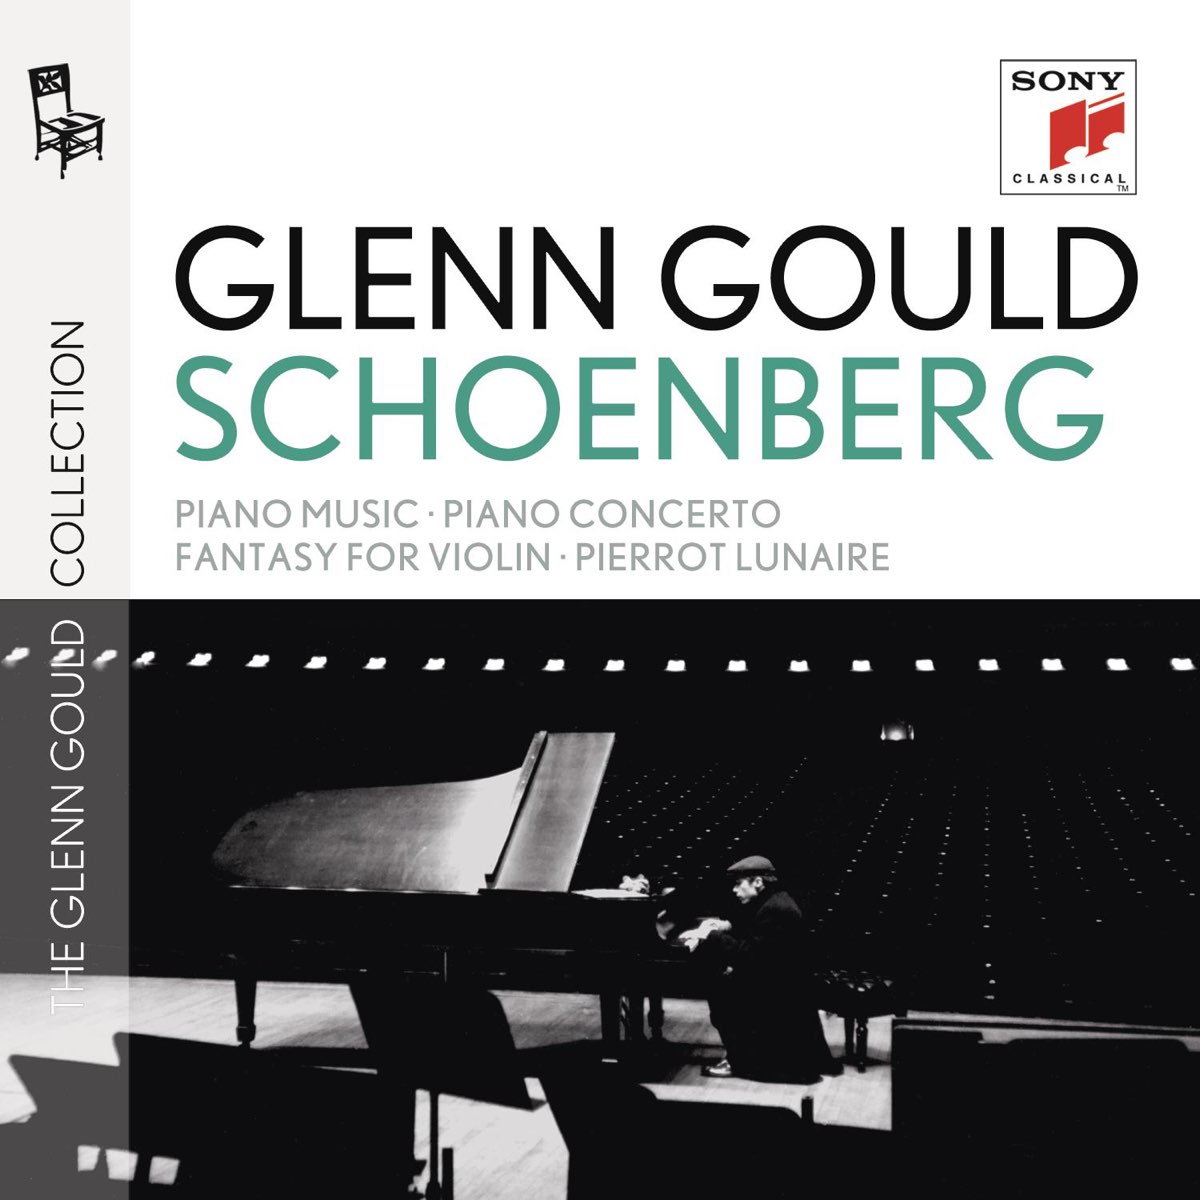 Schoenberg: Piano Music, Piano Concerto, Fantasy for Violin, Pierrot  Lunaire by CBC Symphony Orchestra, Glenn Gould & Robert Craft on Apple Music